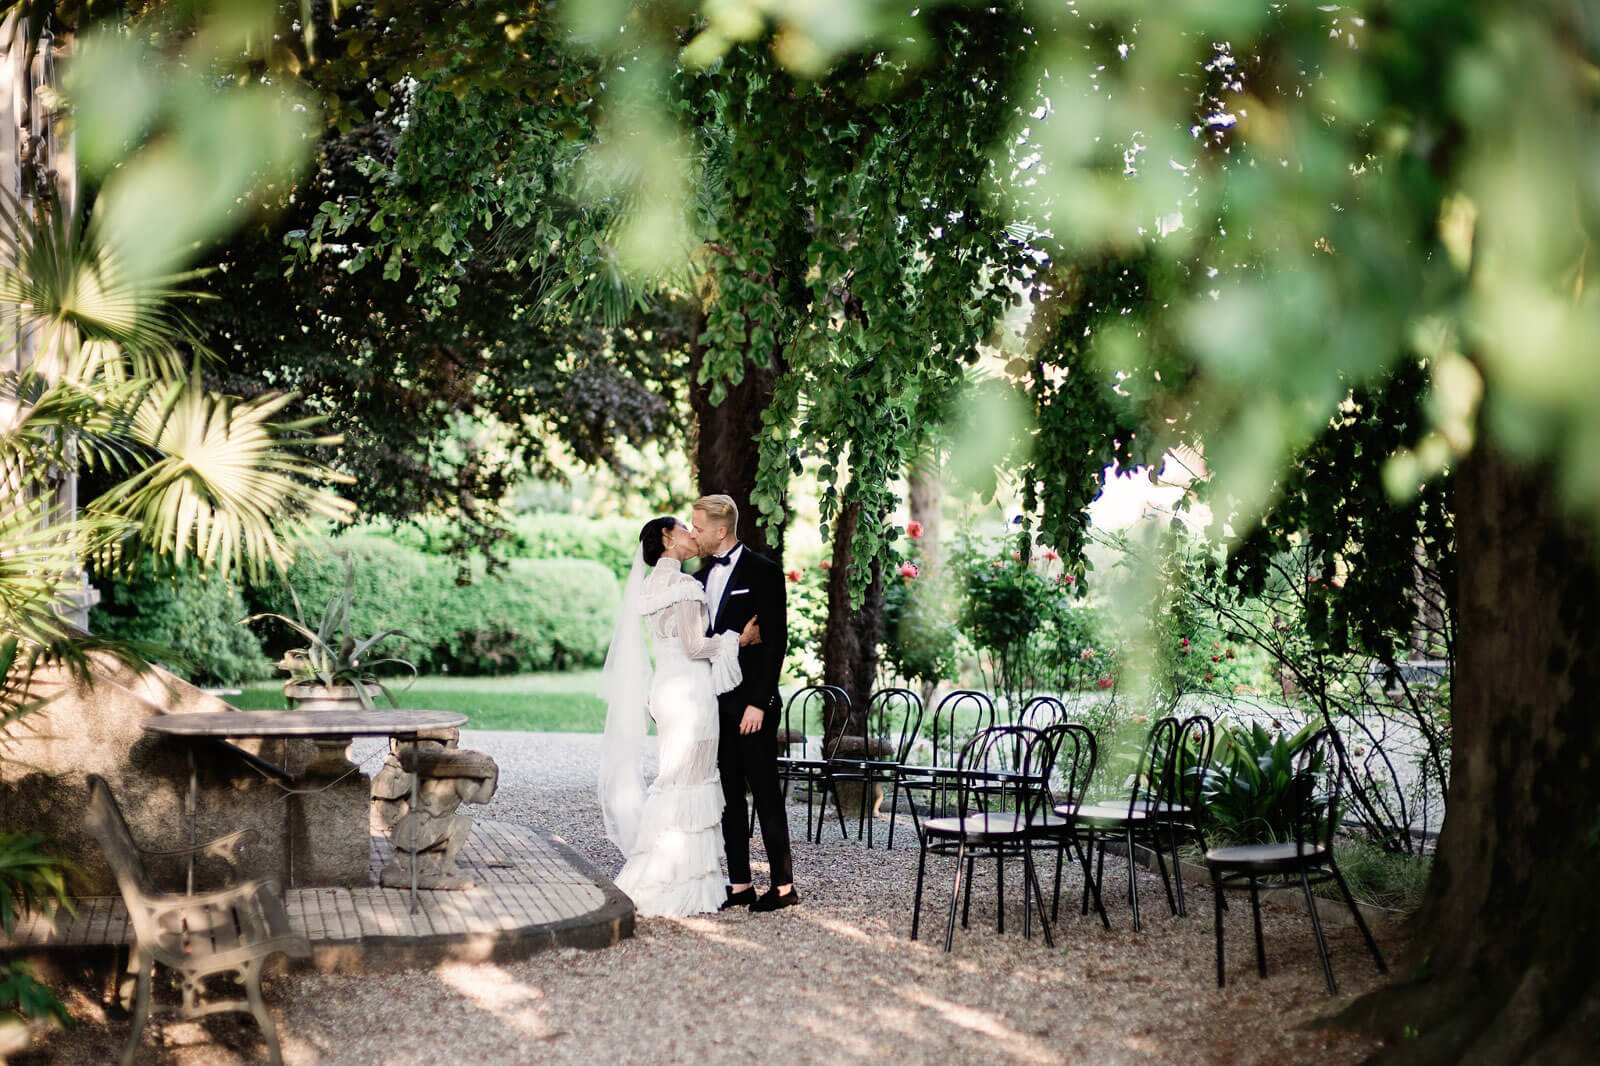 The bride and groom are kissing in a garden full of trees, with chairs on one side and an old table and bench on the other.